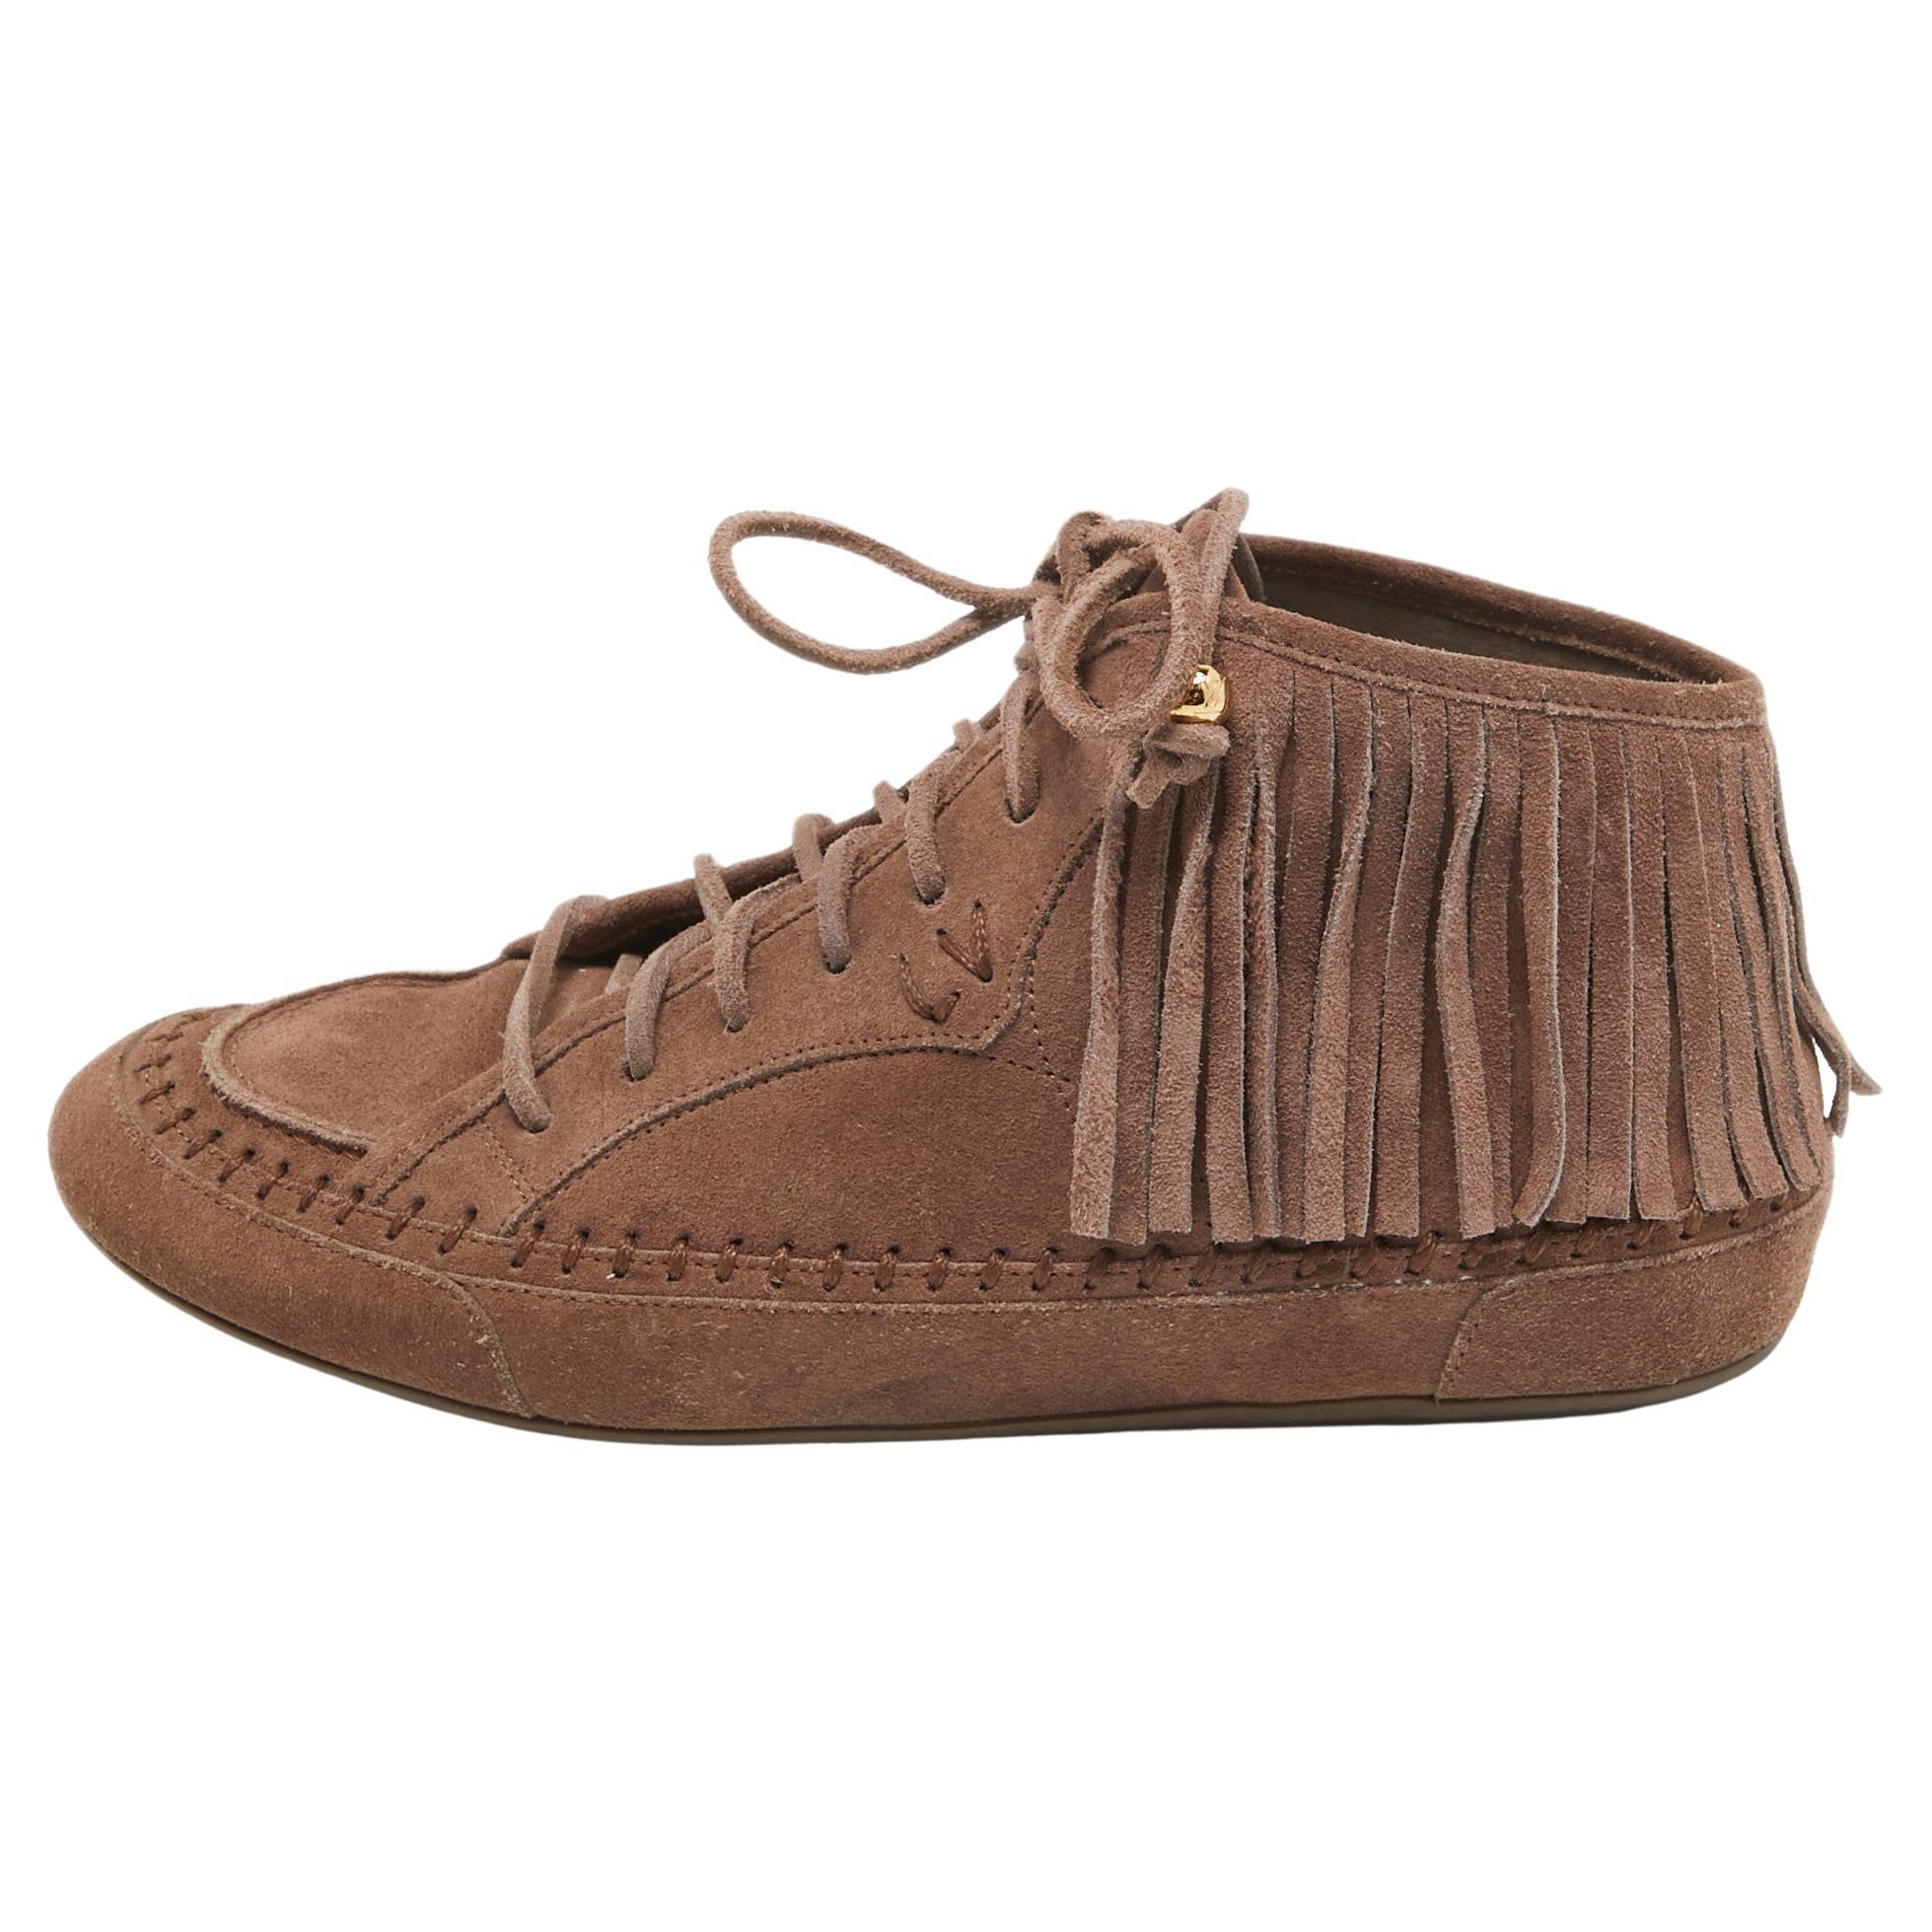 Louis Vuitton Brown Suede Fringe Details High Sneakers Size 39 For Sale